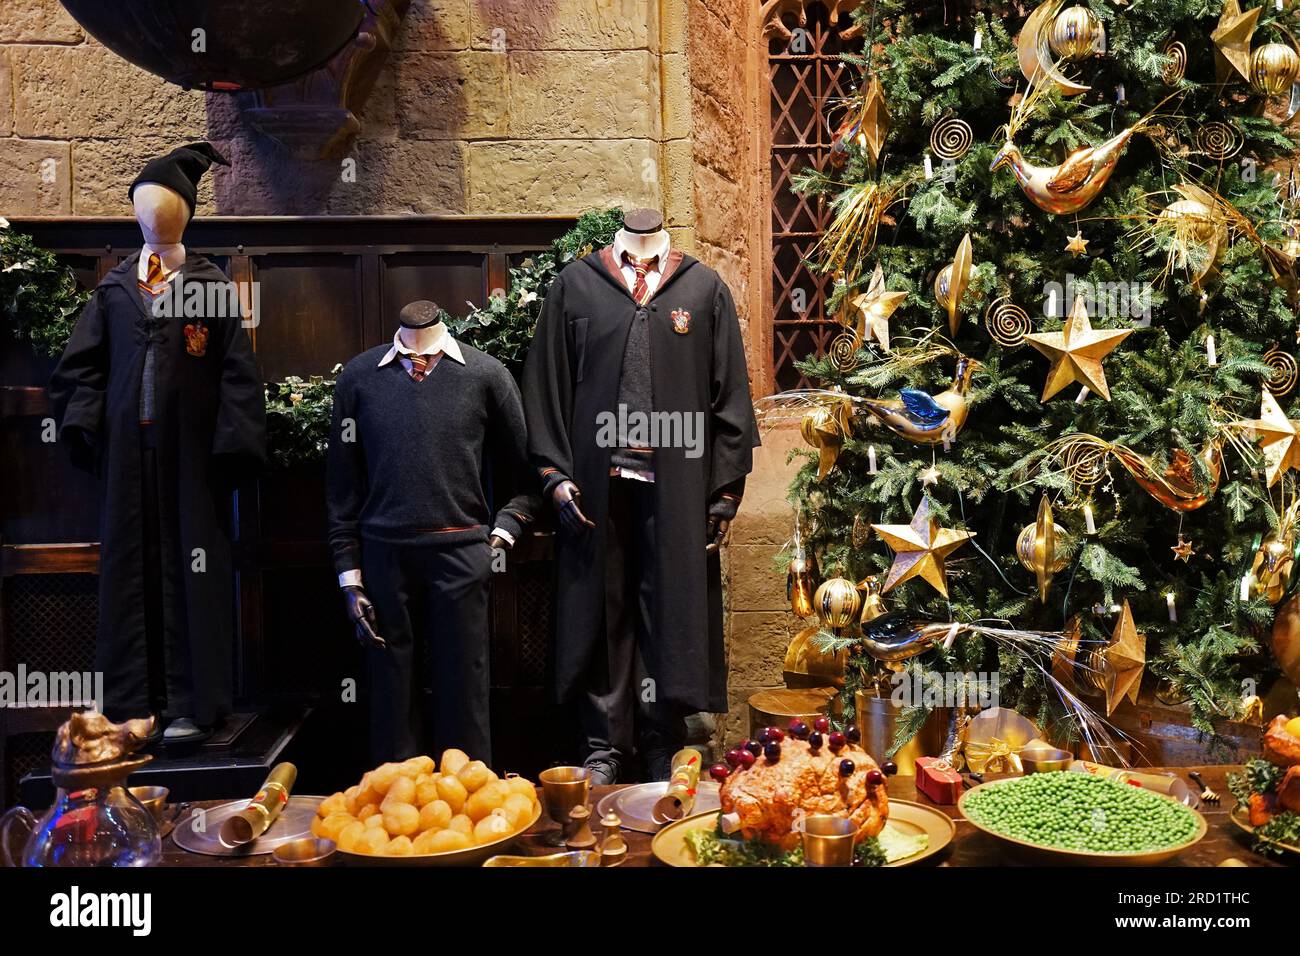 Hogwarts' great hall costume and props at the warner bros studio tour London- The making of Harry Potter, United Kingdom Stock Photo